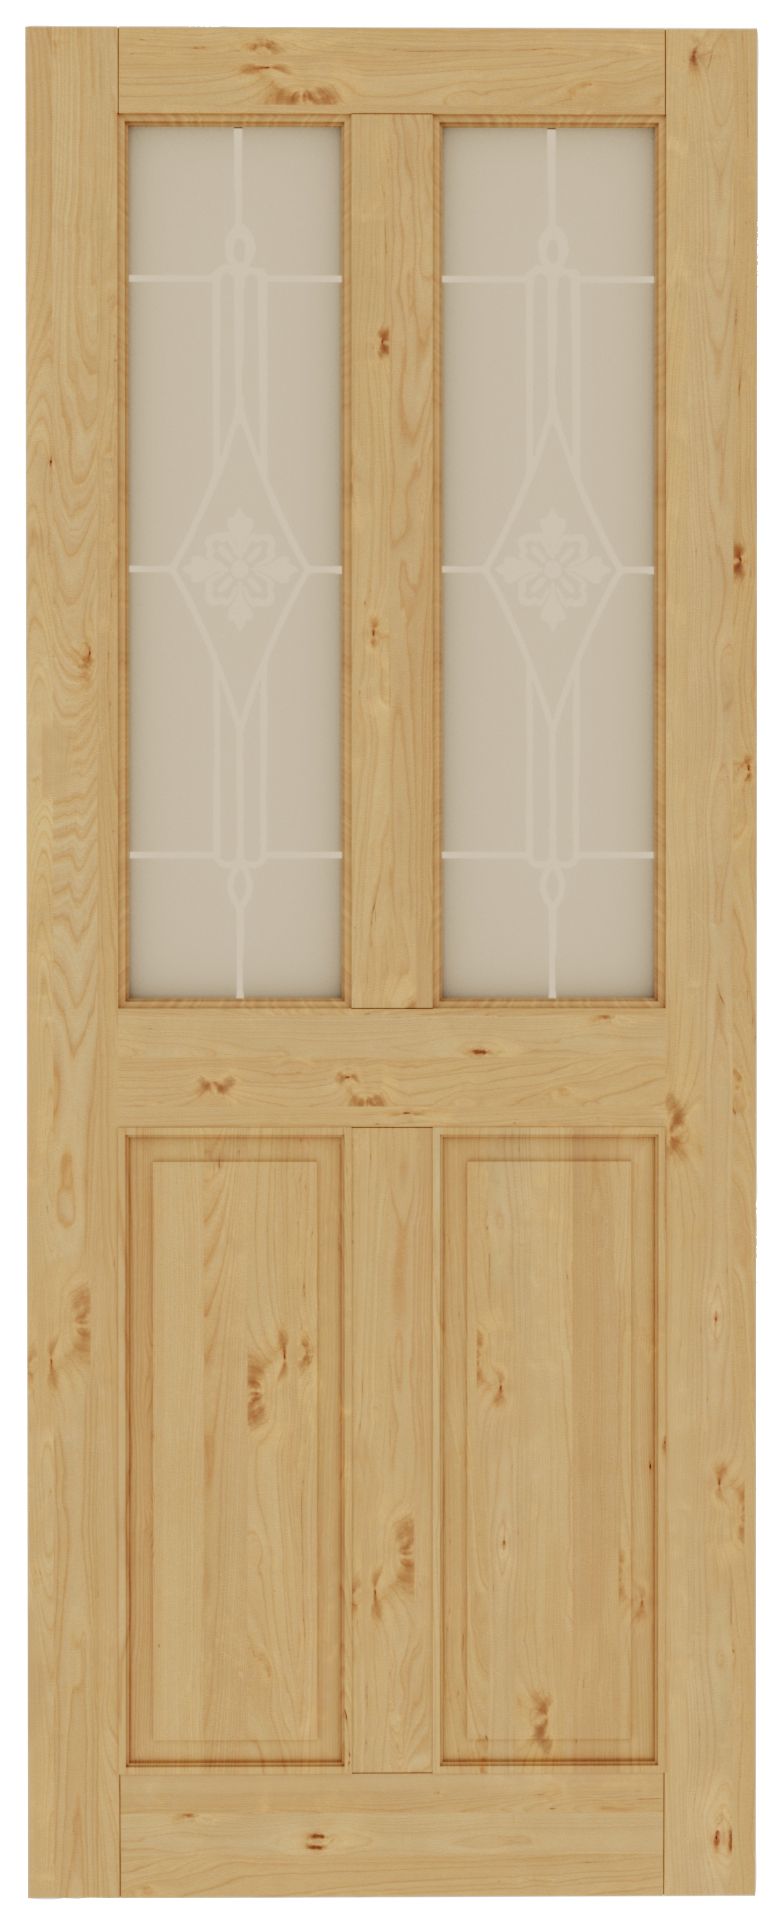 Image of Wickes Chester 4 Panel Knotty Pine Glazed Door -1981 x 838mm